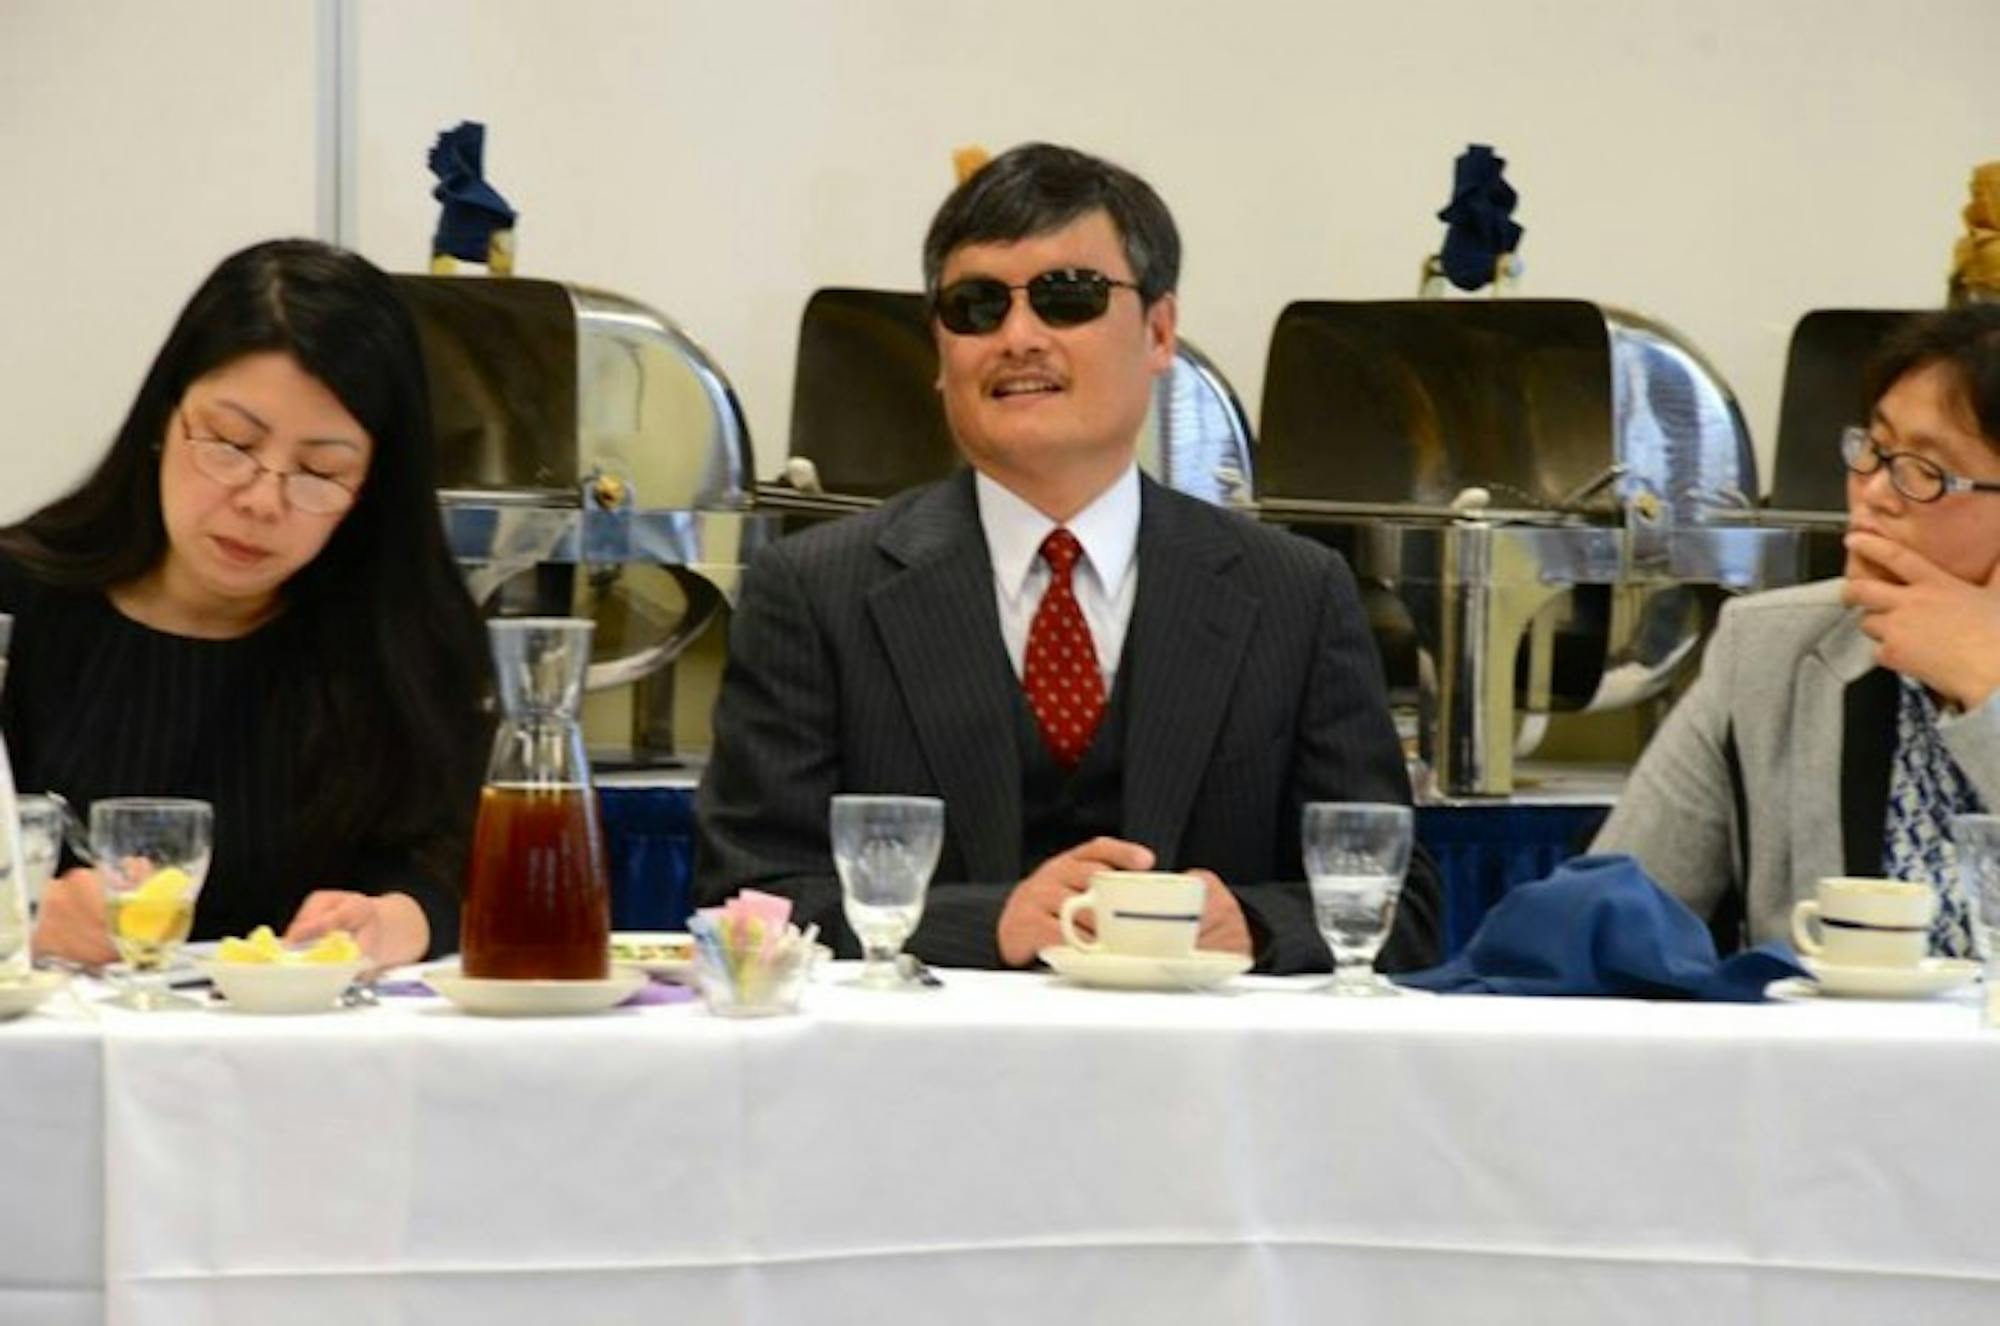 Prominent civil rights advocate Chen Guangcheng discusses the current state of human rights in China. Guangcheng reflected on his work as a lawyer and his persecution by the Chinese government.